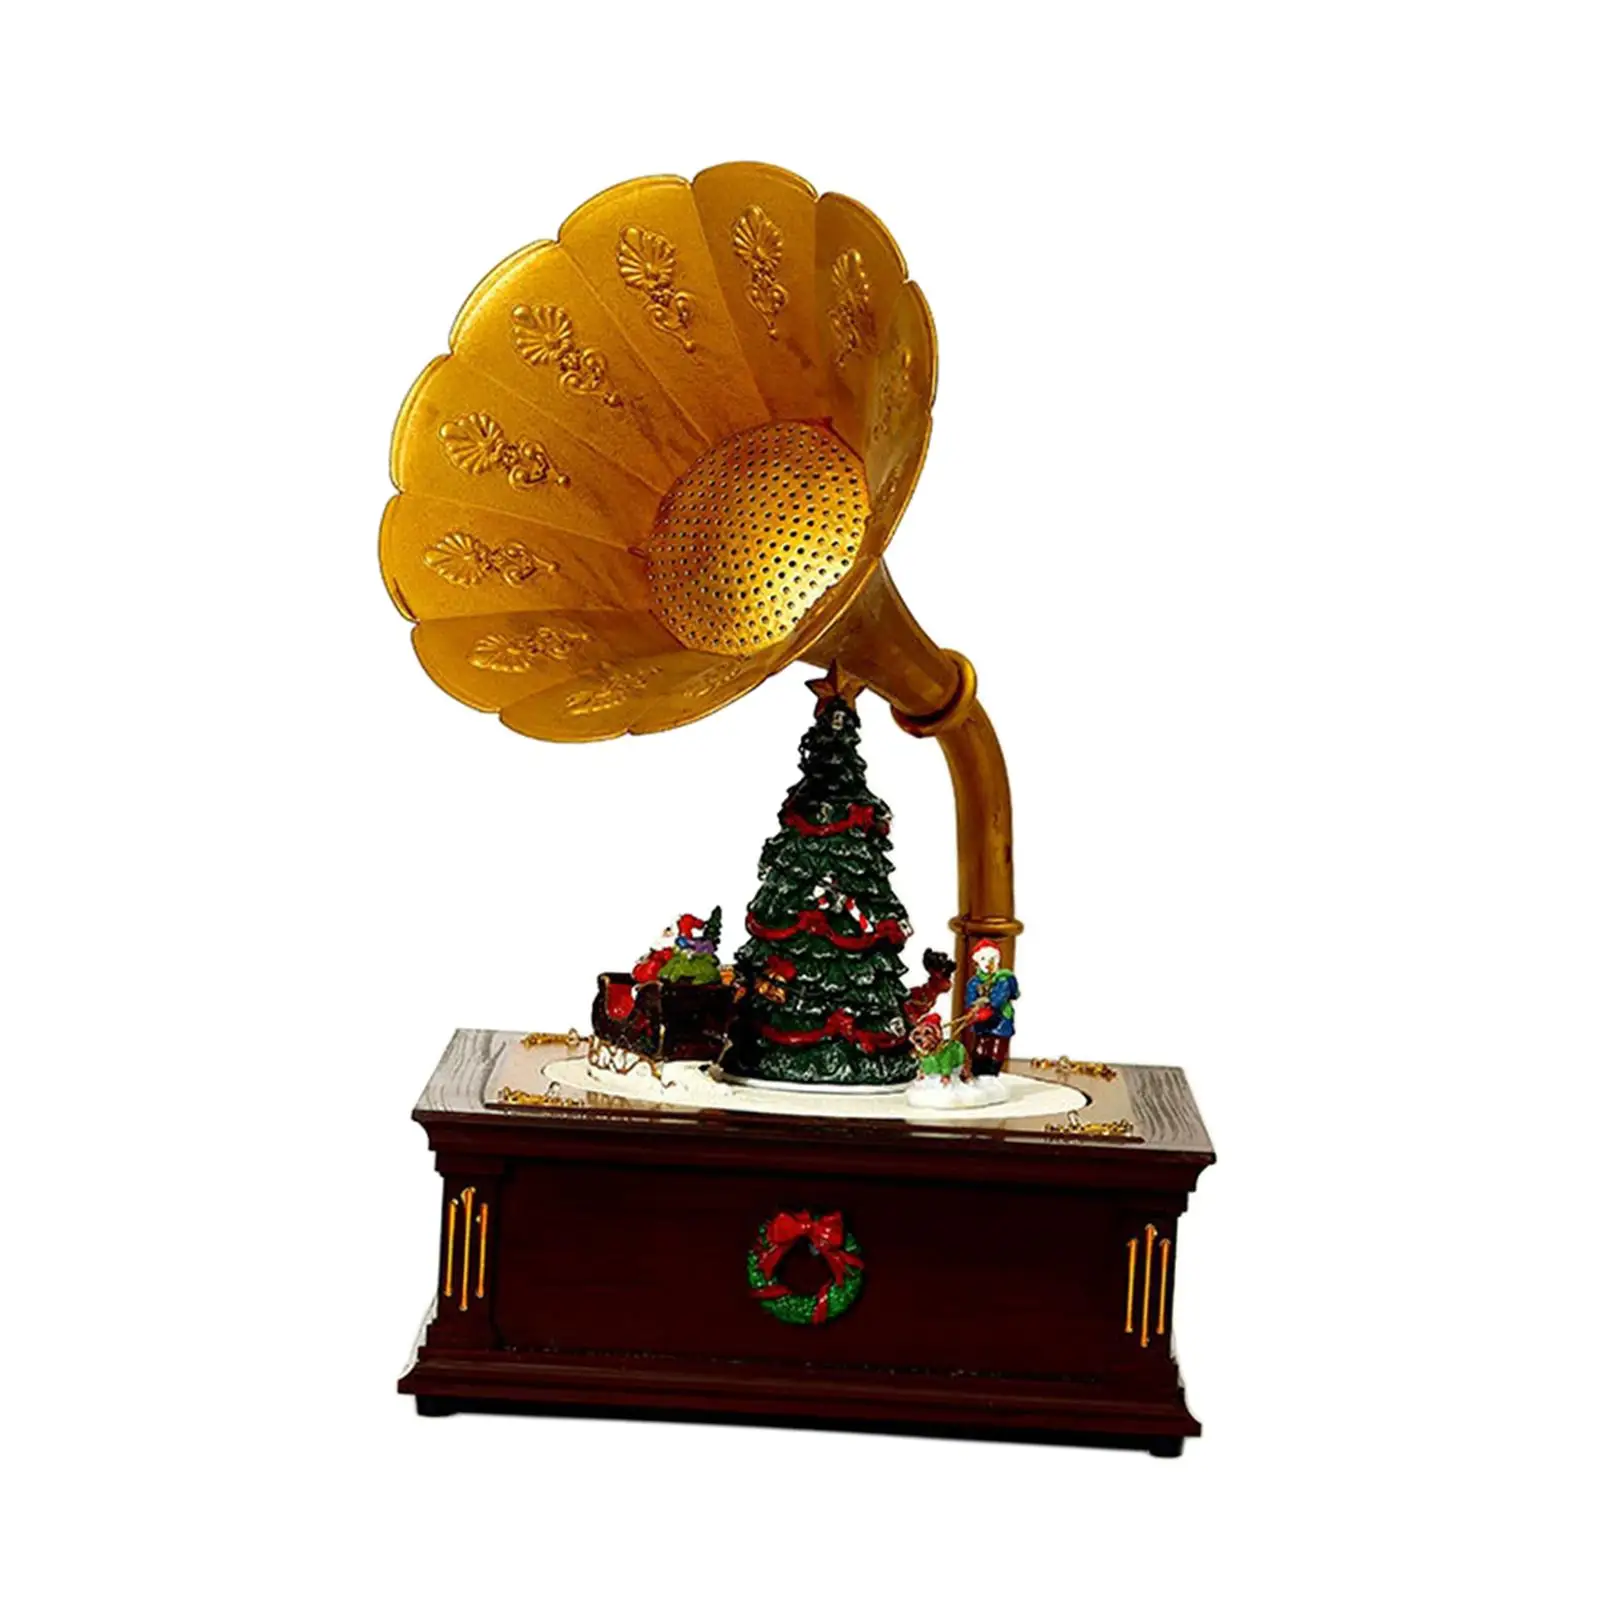 Lighted Christmas Music Box Toy Xmas Musical Box for Home Desktop Decoration